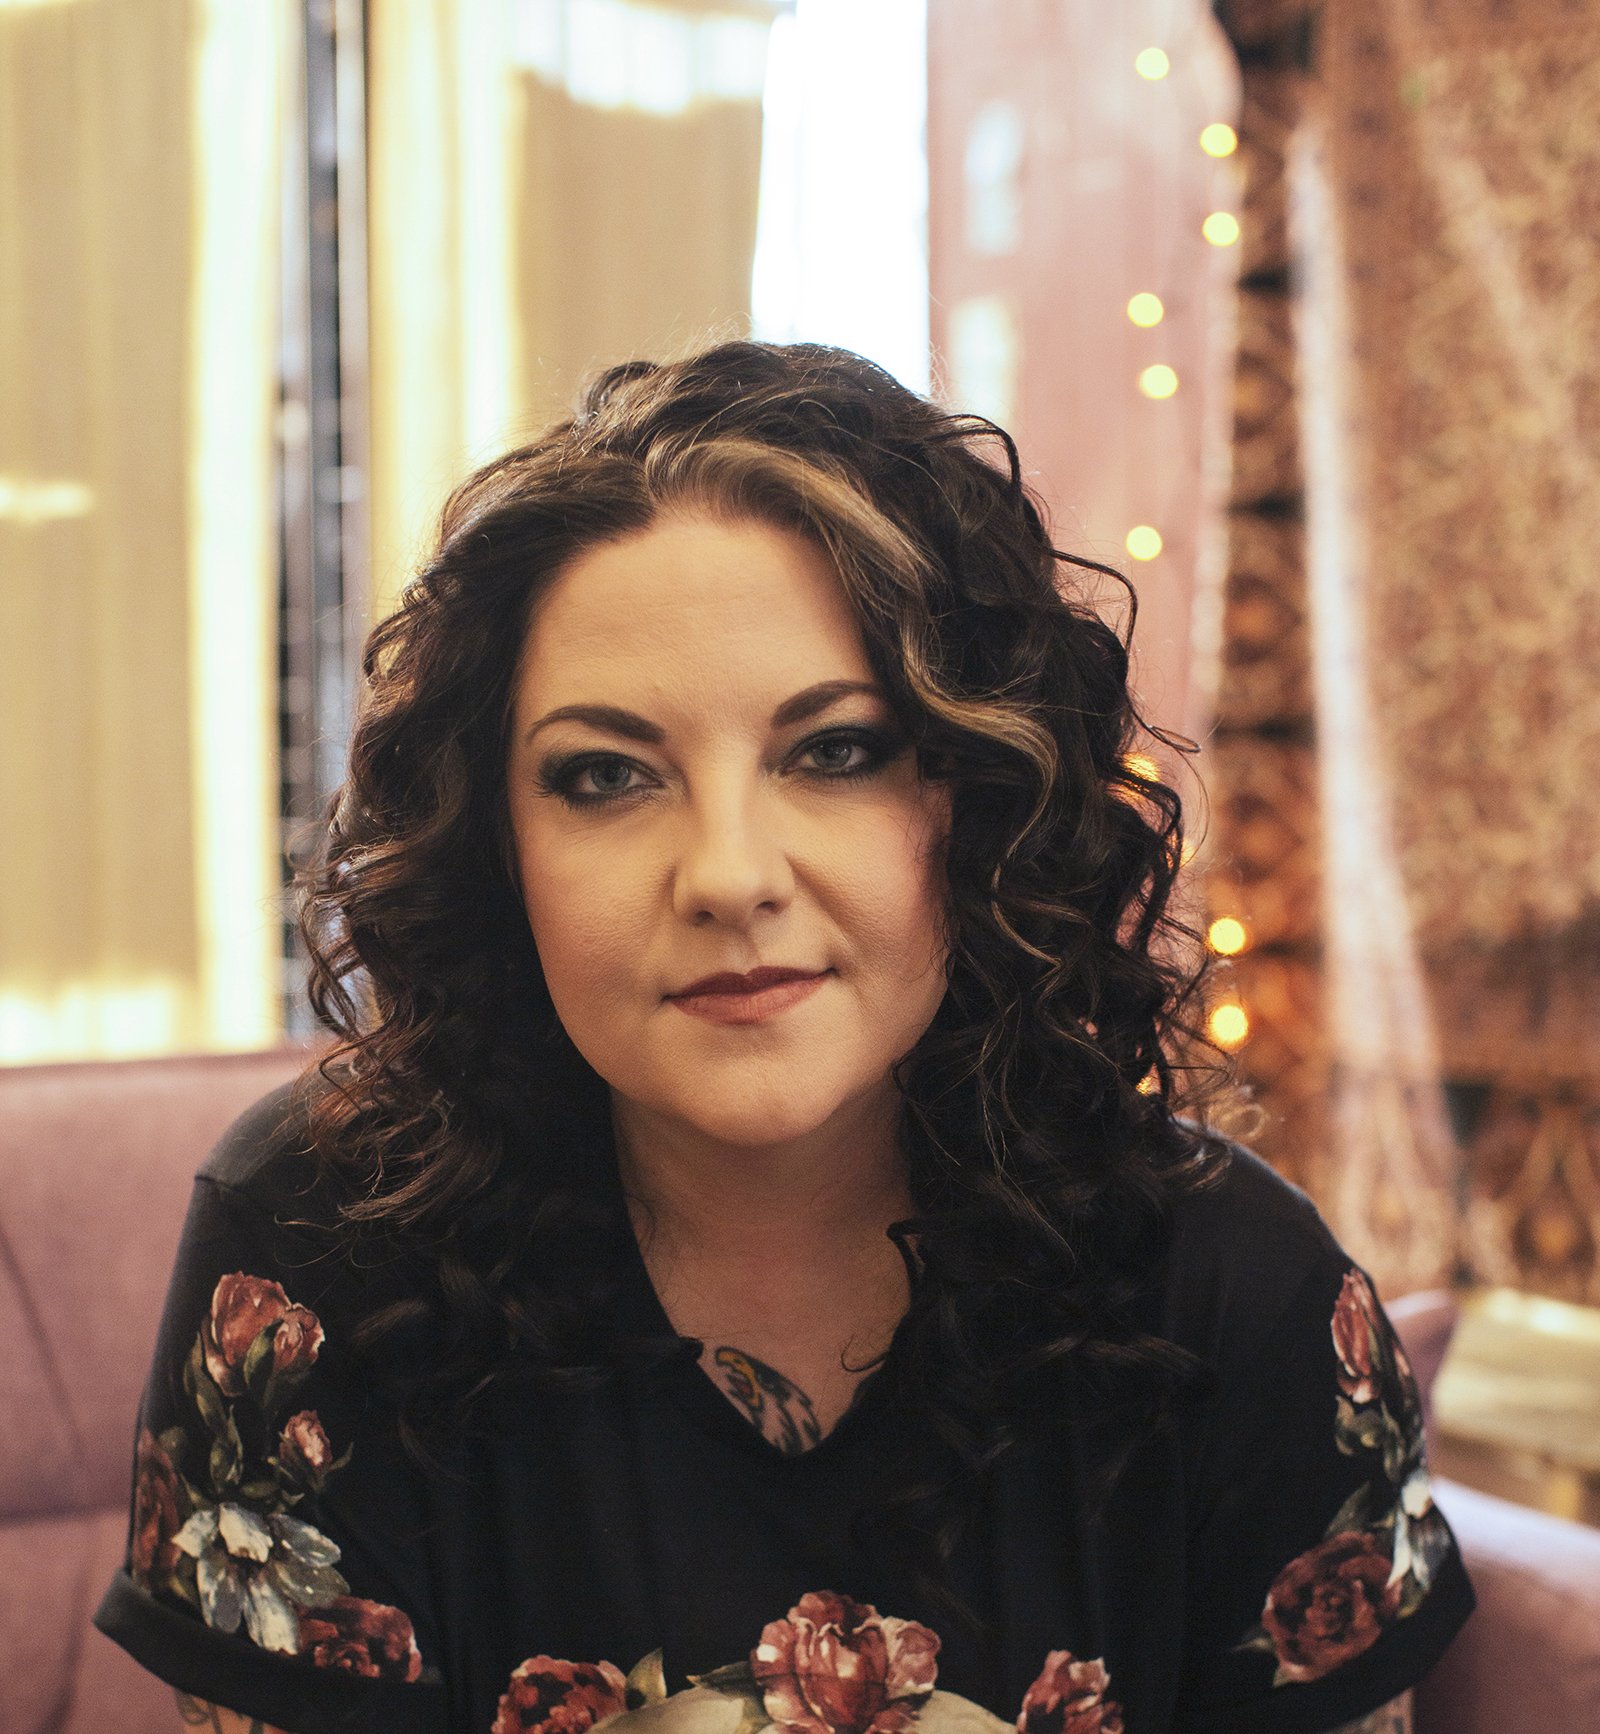 American country music singer-songwriter, ASHLEY MCBRYDE announces headline Belfast show at The Limelight 1 on Tuesday, September 1st 